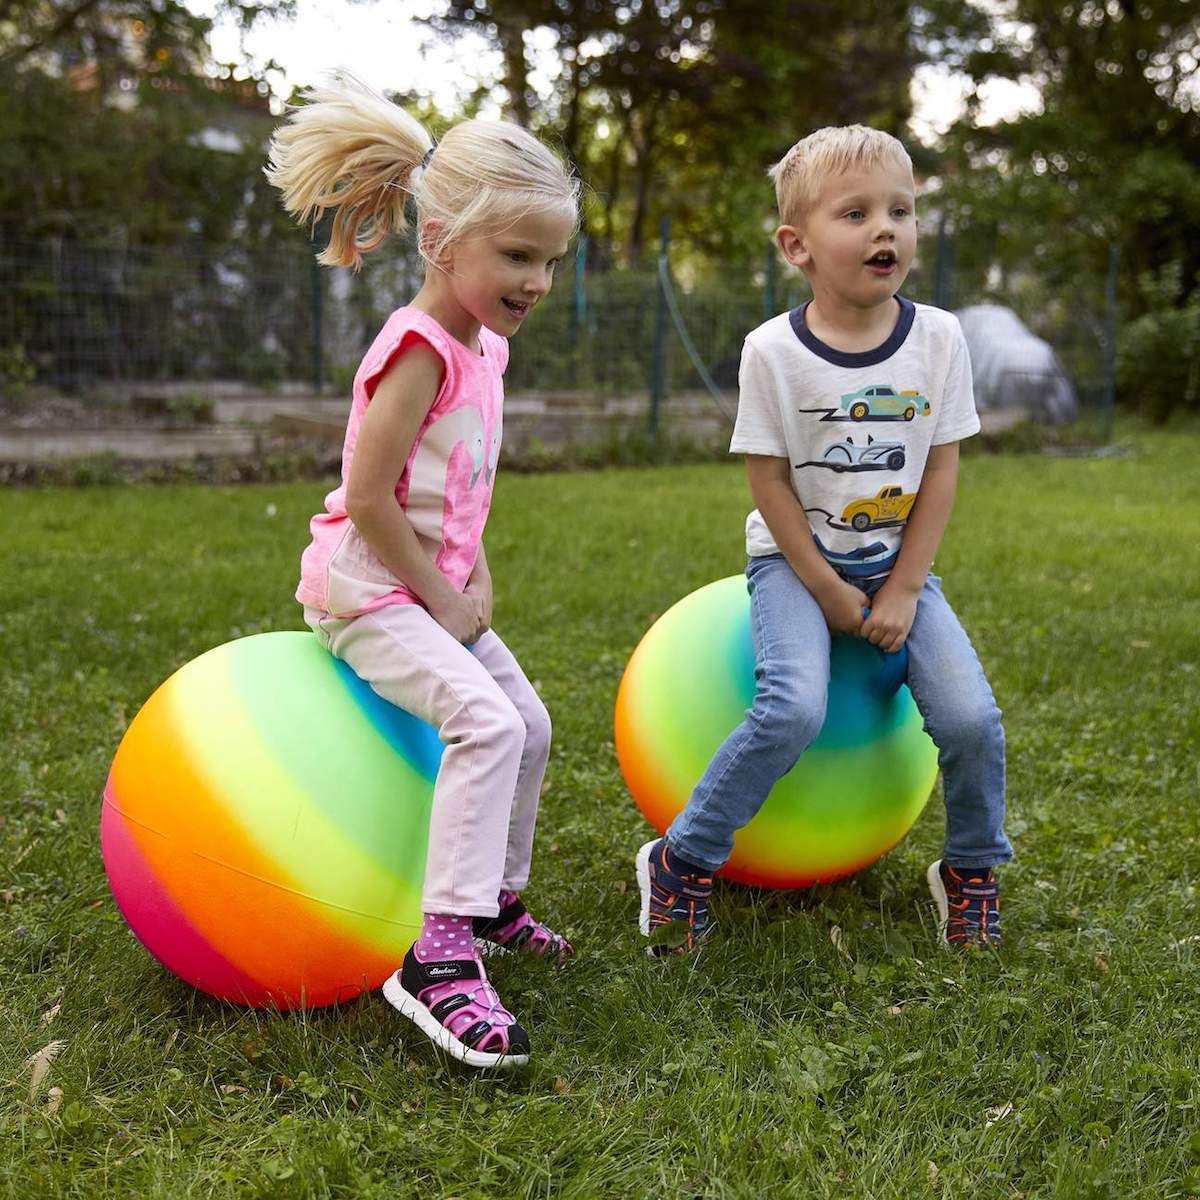 25 Of The Most Amazing Toys On Amazon That Will Have Your Kids Jumping For Joy